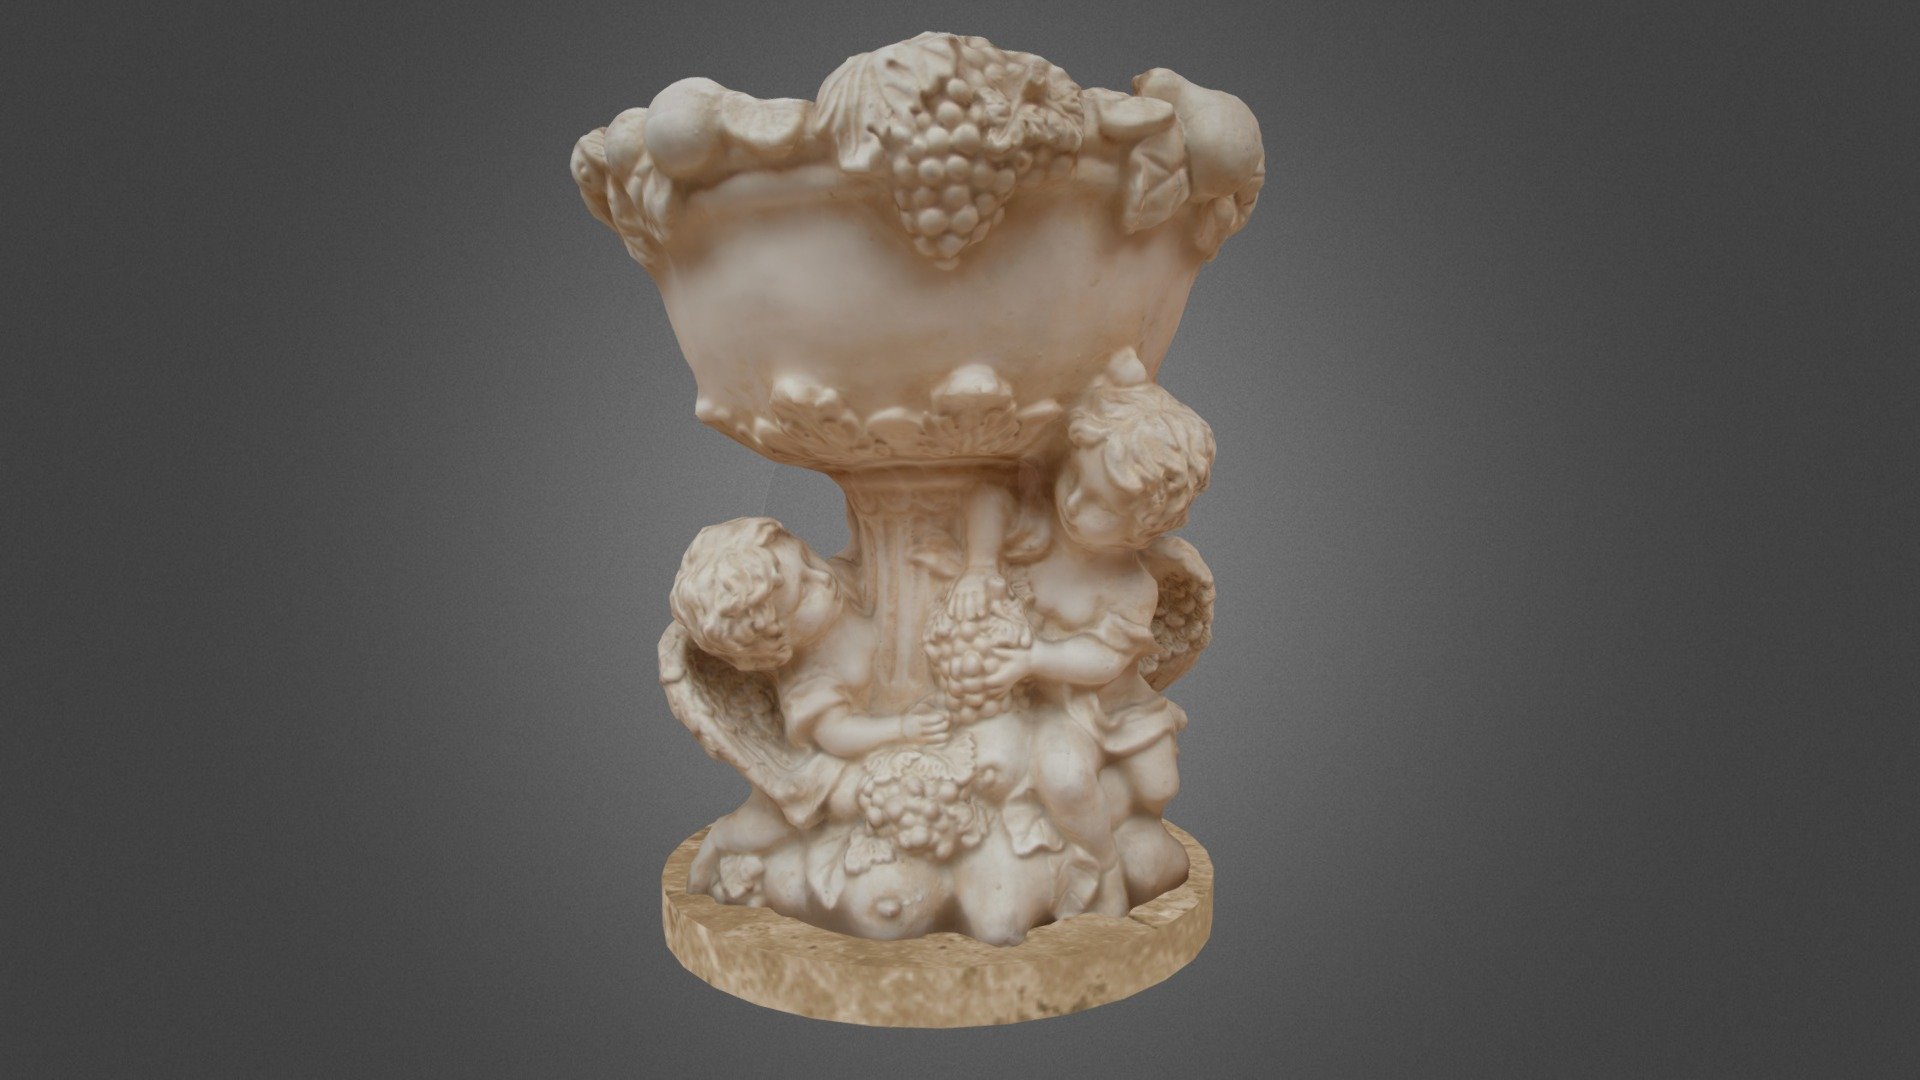 This 3D scan depicts an old vase with two cherubs playing in a garden of abundance 3d model